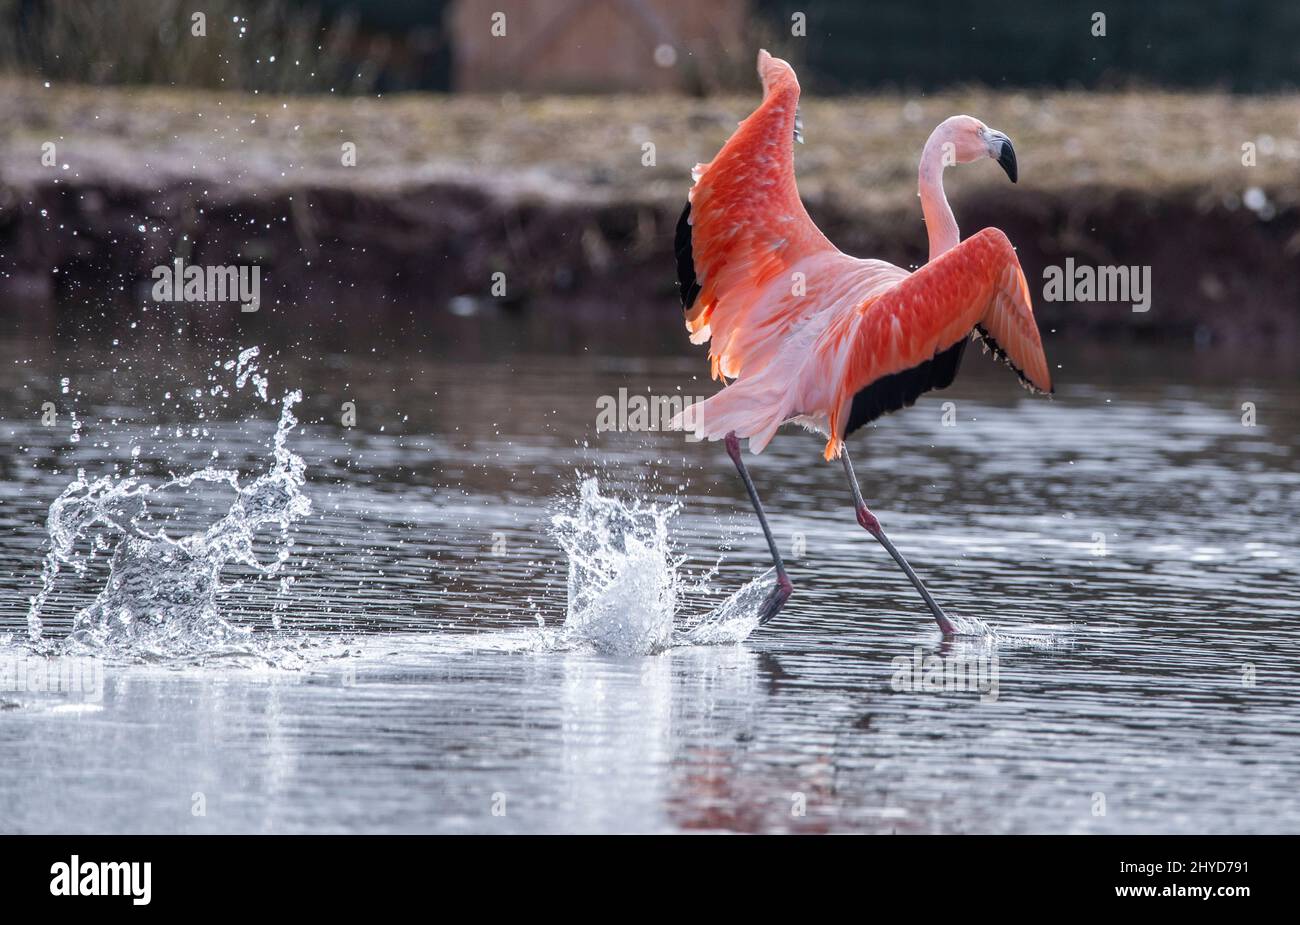 Bird Gardens, UK. 14th Mar, 2022. Oxton, Scottish Borders, Scotland. uk. A Chilean flamingo flies out across the water at Bird Gardens Scotland to enjoy some warm spring sunshine. Flamingos are not born with their beautiful pink plumage. Their color comes from the carotenoid pigments they consume as part of their diet. Some scientists believe that a flamingo's success in breeding relies on its bright color. Credit: phil wilkinson/Alamy Live News Stock Photo